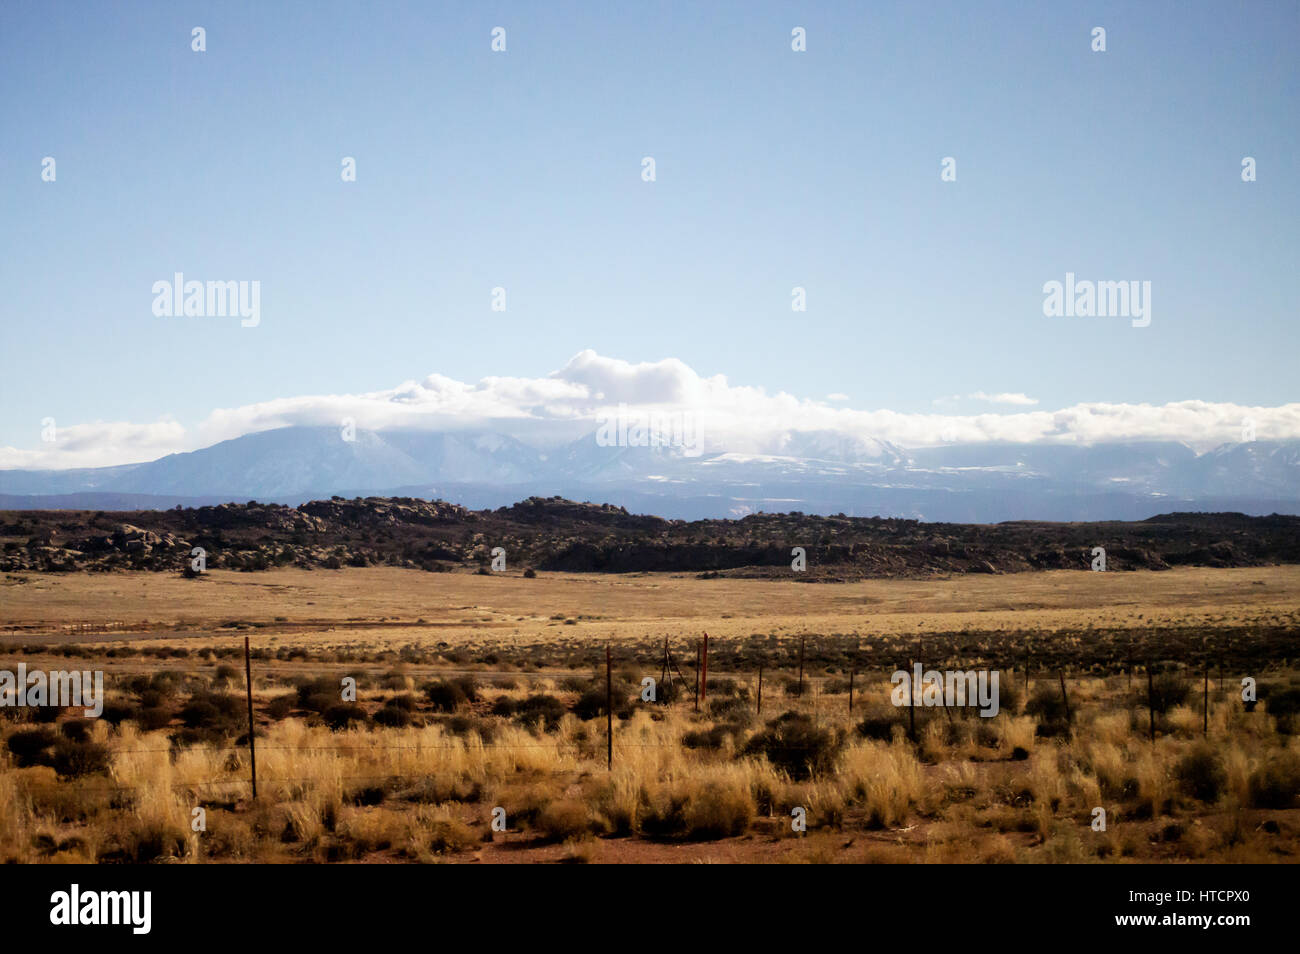 A desert landscape with a an old fence and scrub brush with mountain peaks behind it. Stock Photo